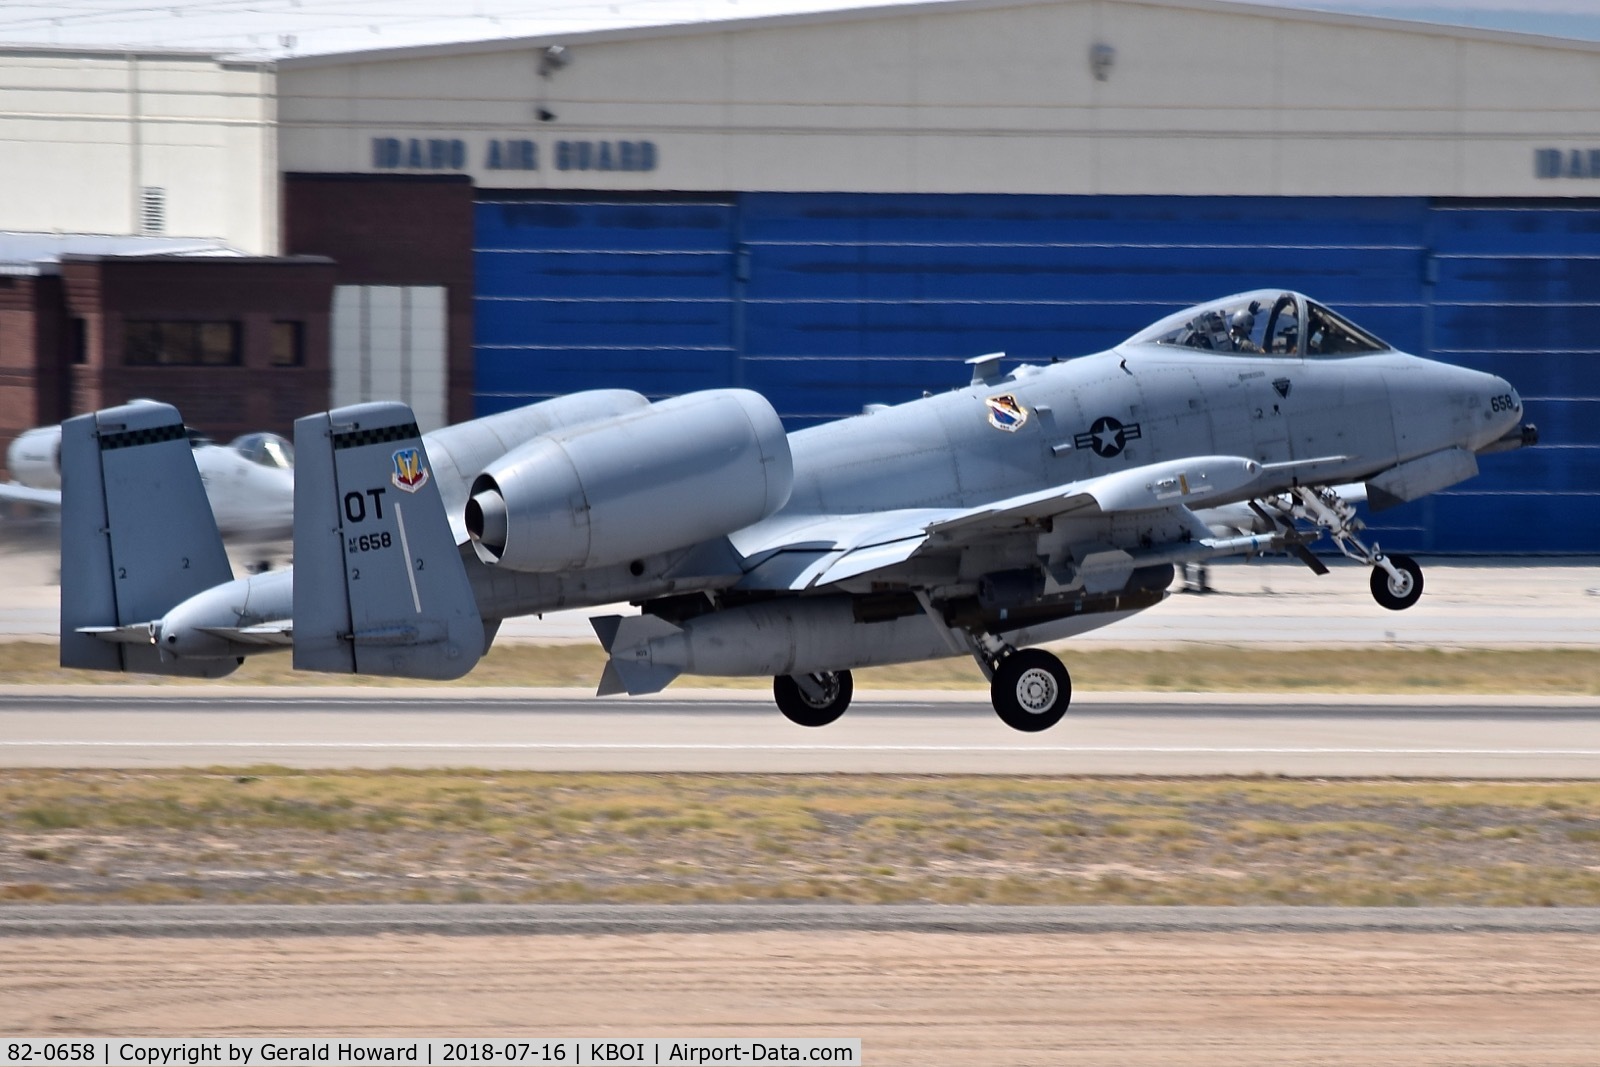 82-0658, 1982 Fairchild Republic A-10C Thunderbolt II C/N A10-0706, Departing RWY 28R. 422nd T&E Sq., 53rd Wing, 79th Test & Evaluation Group, Nellis AFB, NV.